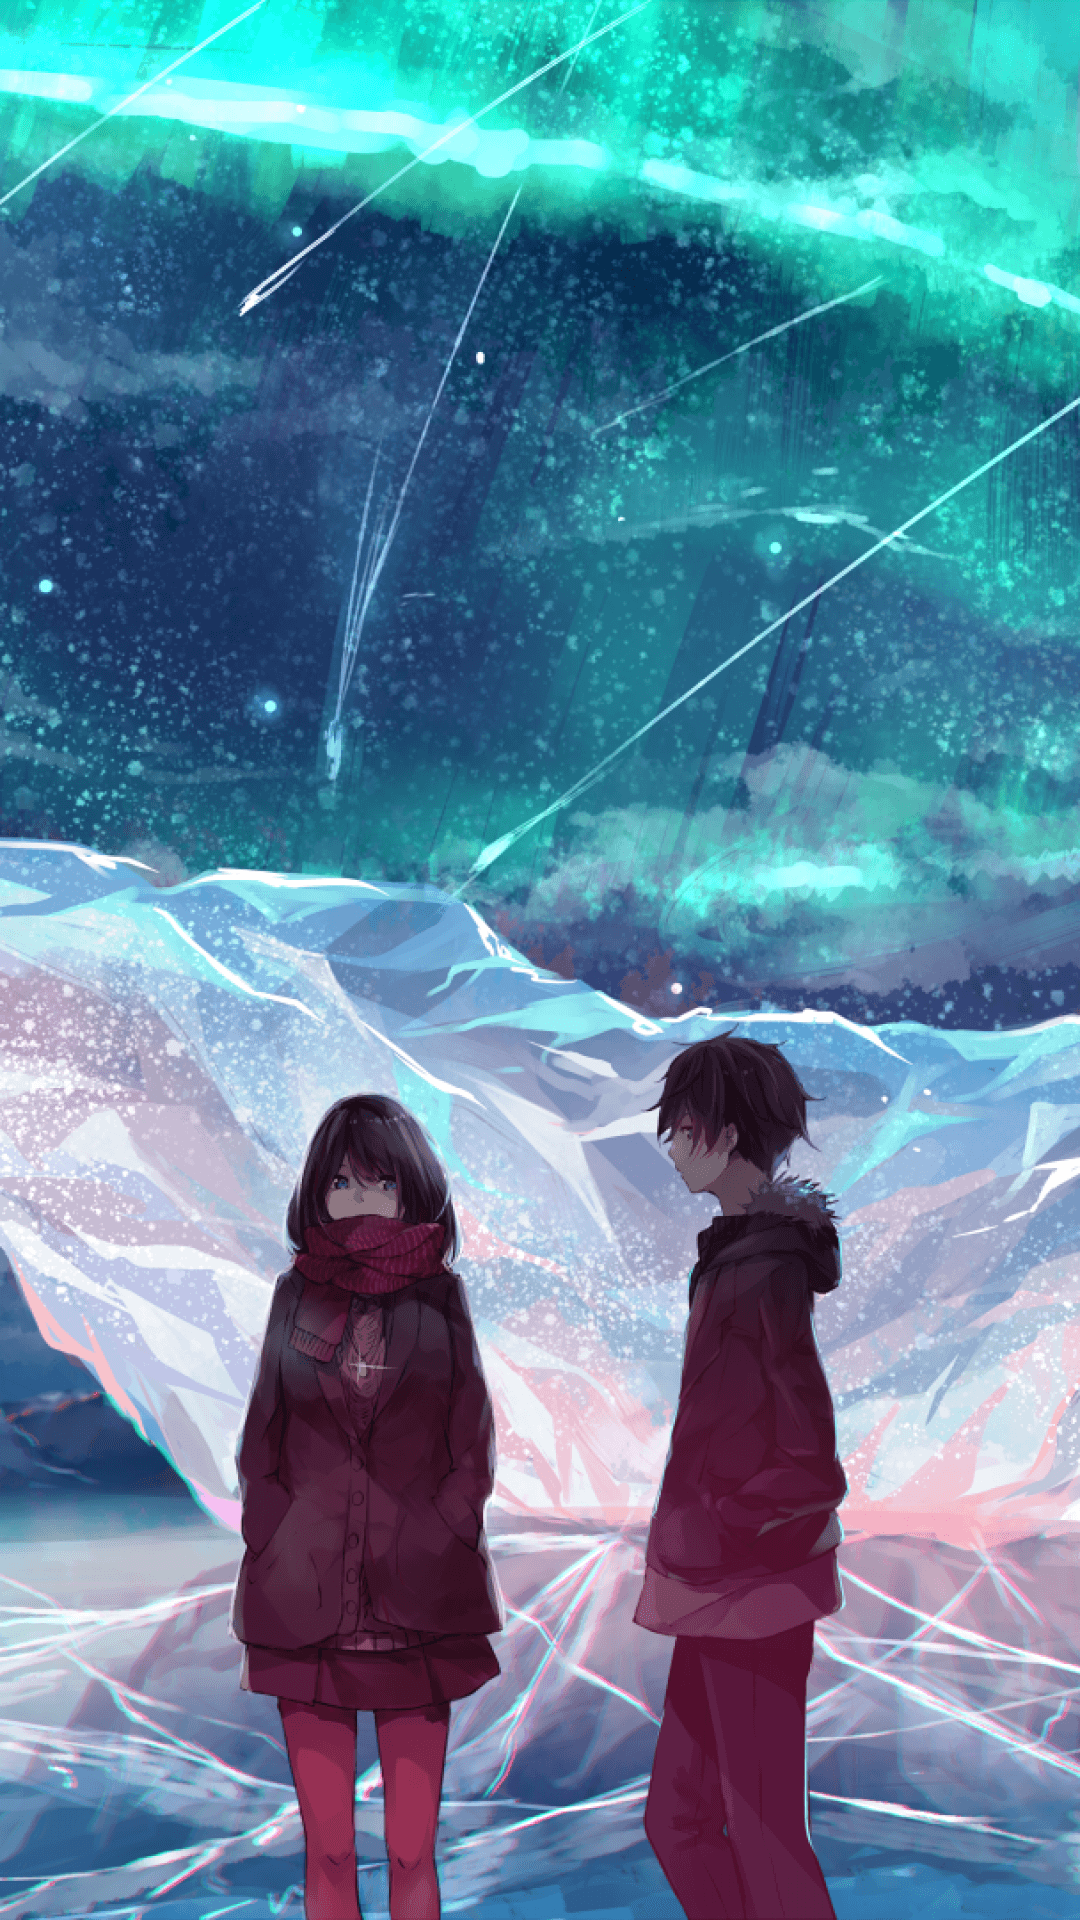 Anime Couple, Ice Field, Scarf, Anime Girl, Boy Couple Wallpaper iPhone Wallpaper & Background Download